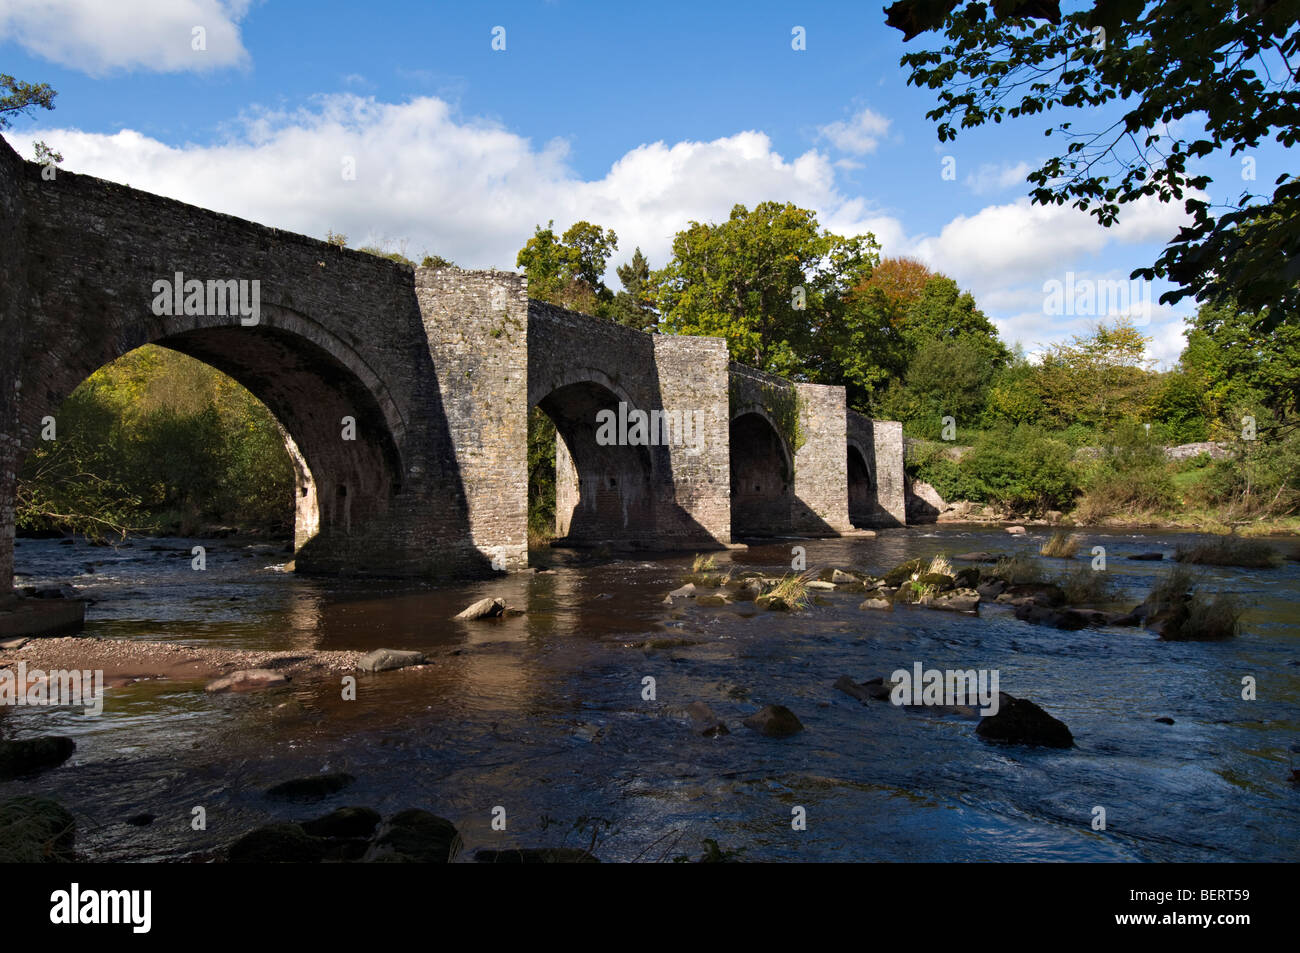 Picturesque picture of the old Llangynidr bridge which crosses the river Usk taken at Llangynidr mid Wales early autumn Stock Photo